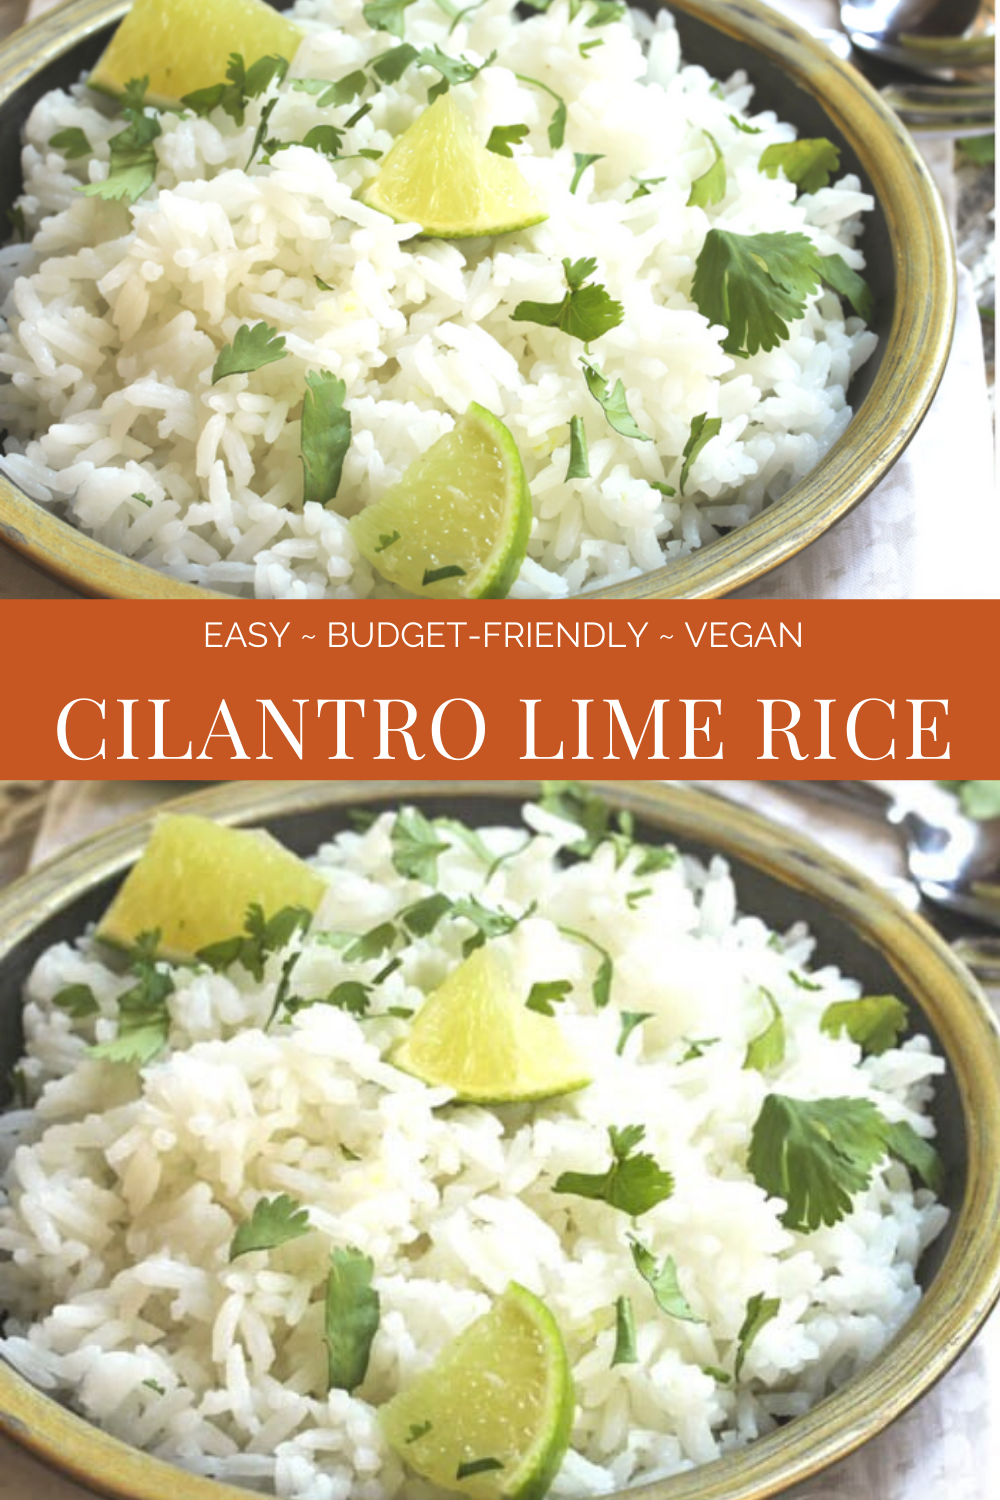 Cilantro Lime Rice - Simple and subtle... this easy rice side dish offers the perfect complement to bigger, bolder flavors such as those found in hearty and spicy Mexican and Indian dishes.

#cilantrolimerice #veganricerecipes ##veganmexicansidedishrecipe #veganindiansidedishrecipe #vegantexmexrecipe #thiswifecooksrecipes #plantbasedrice #veganquarantinecooking  via @thiswifecooks